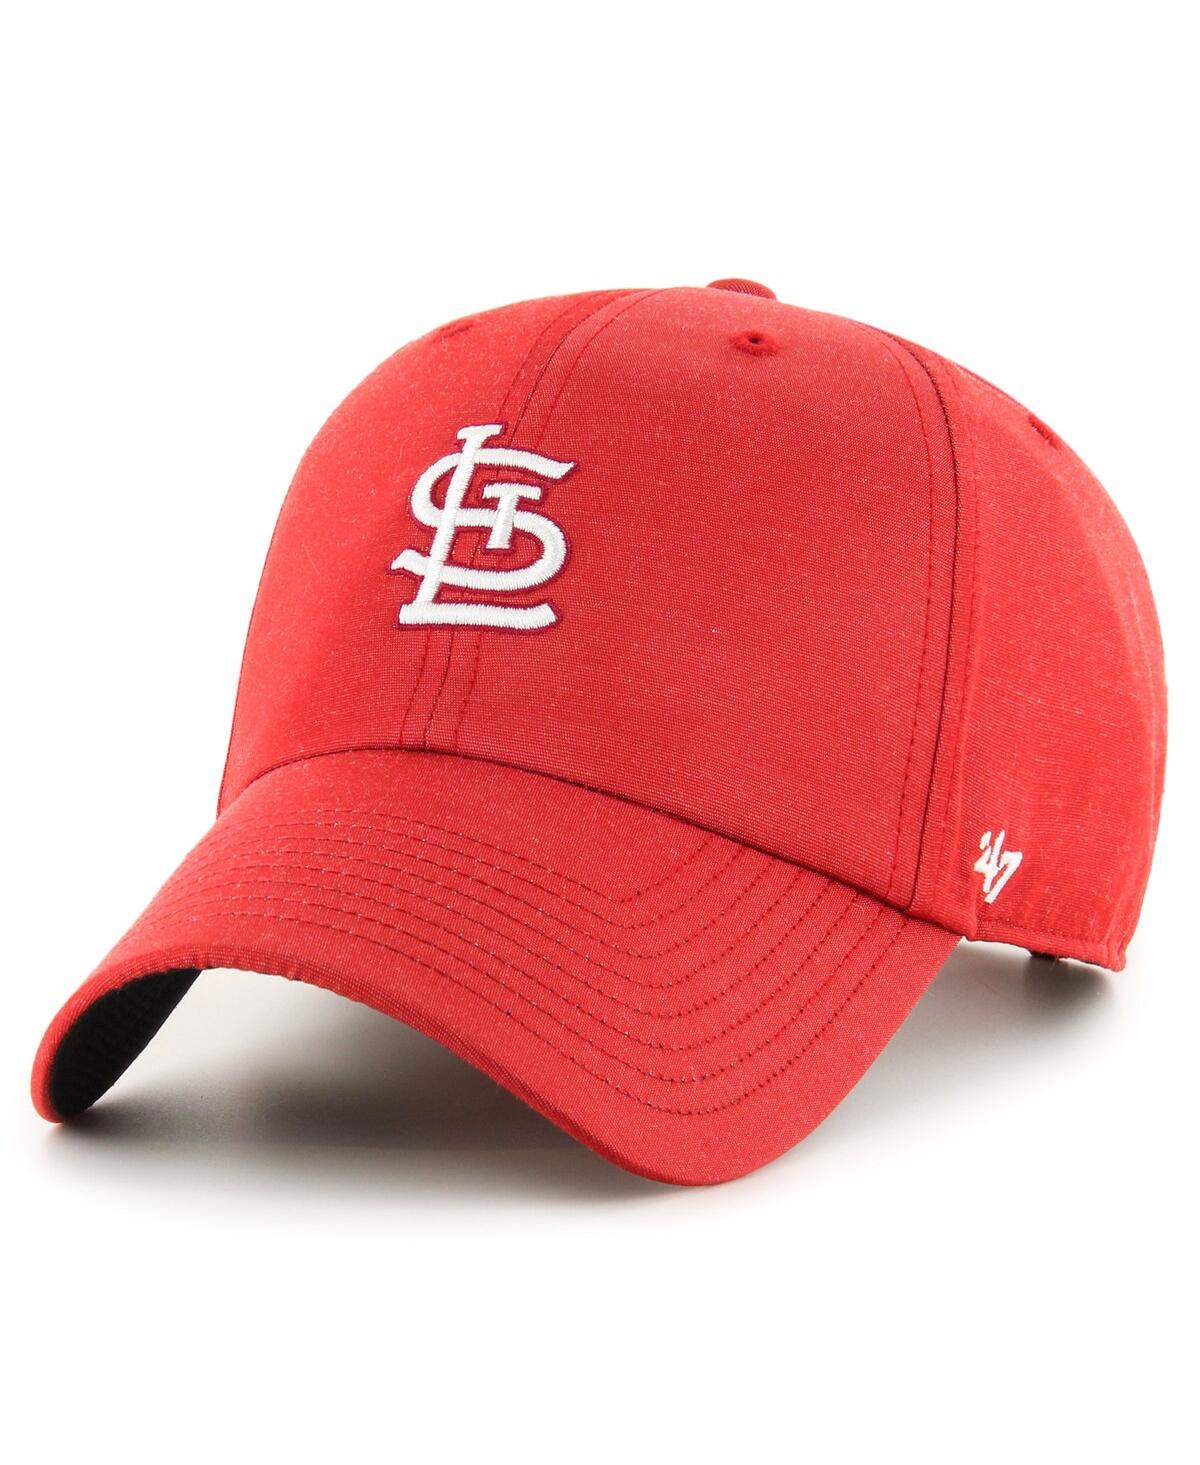 Men's '47 Brand Red St. Louis Cardinals Oxford Tech Clean Up Adjustable Hat - Red